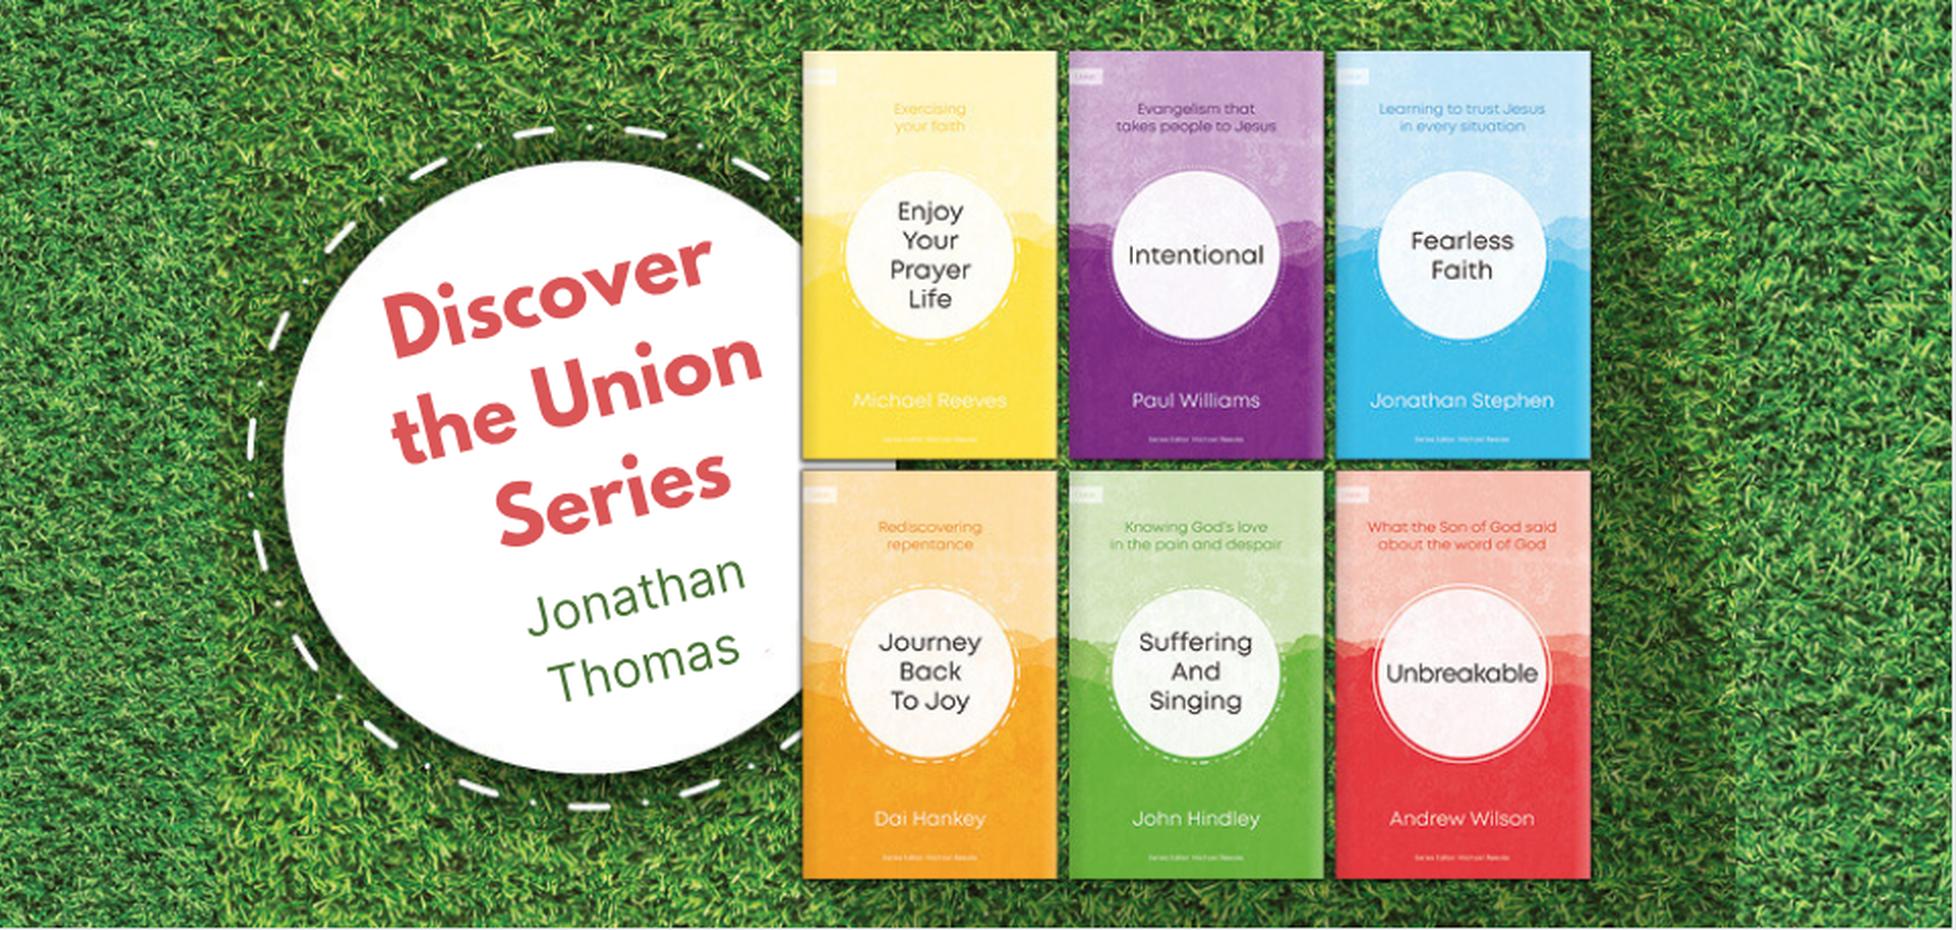 Discover the Union Series